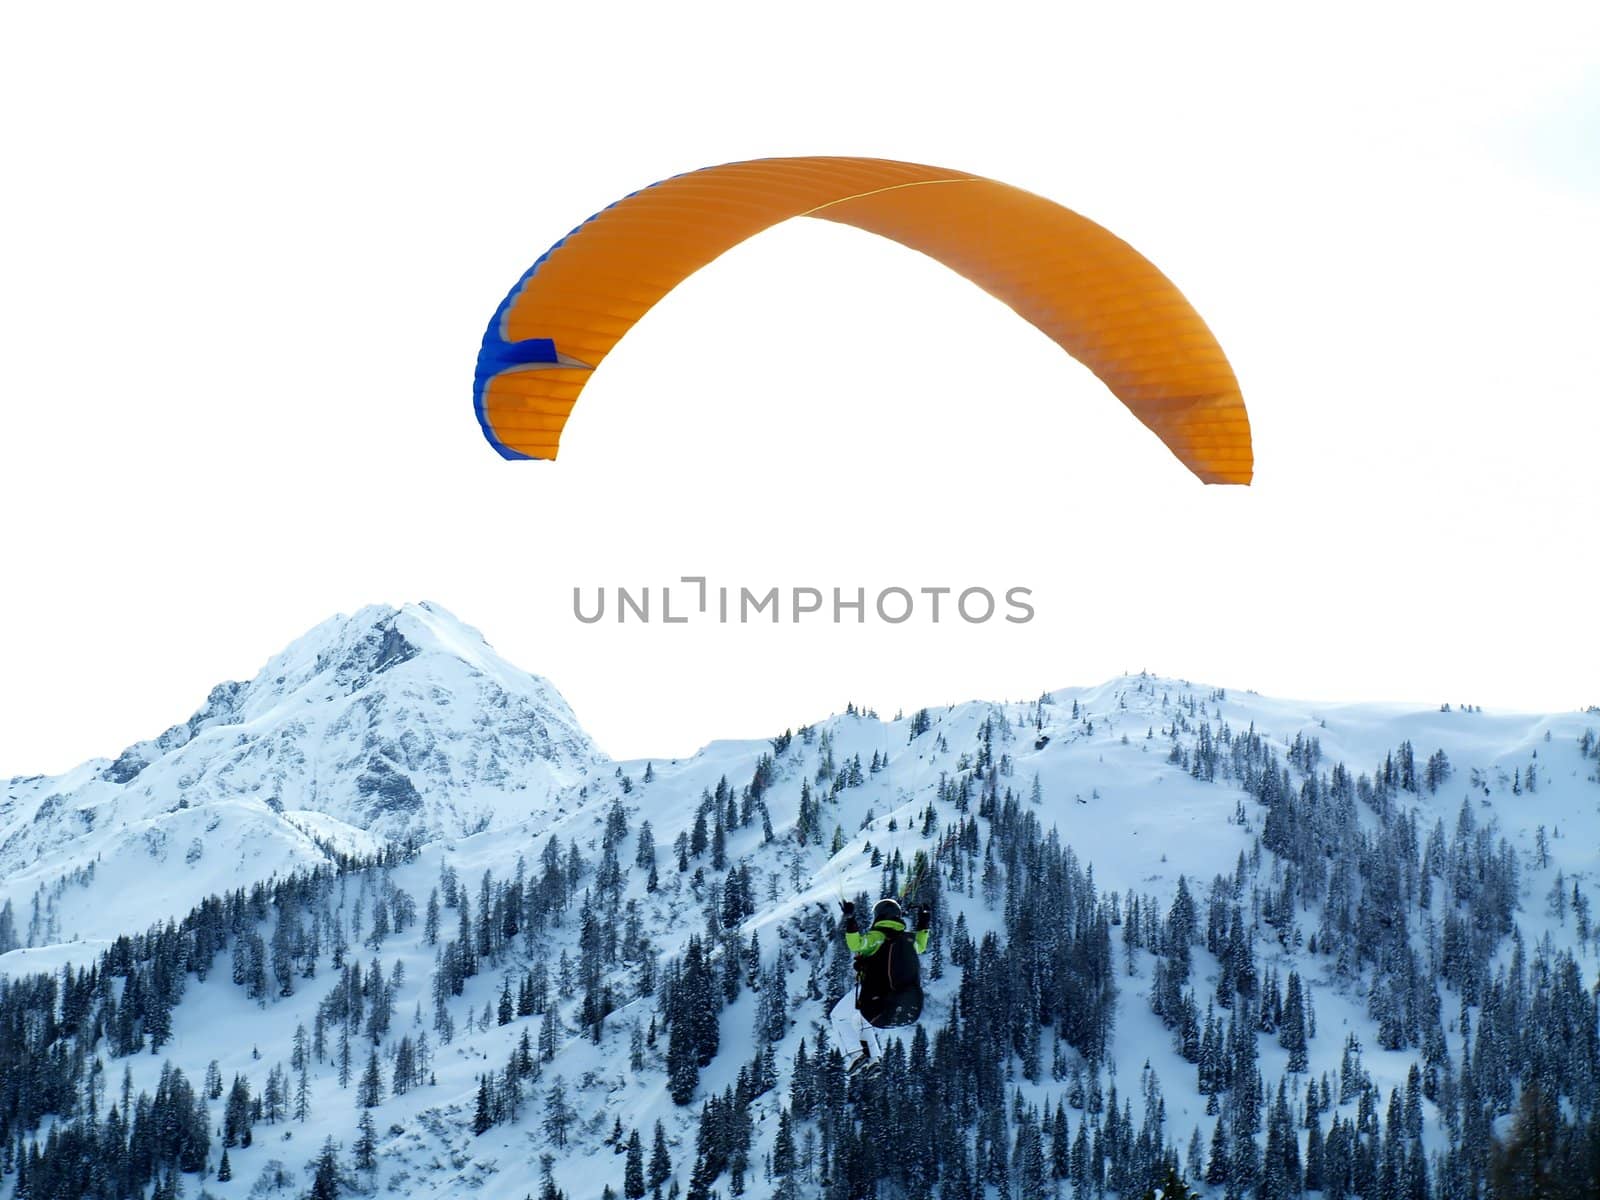 Paraglide by anderm